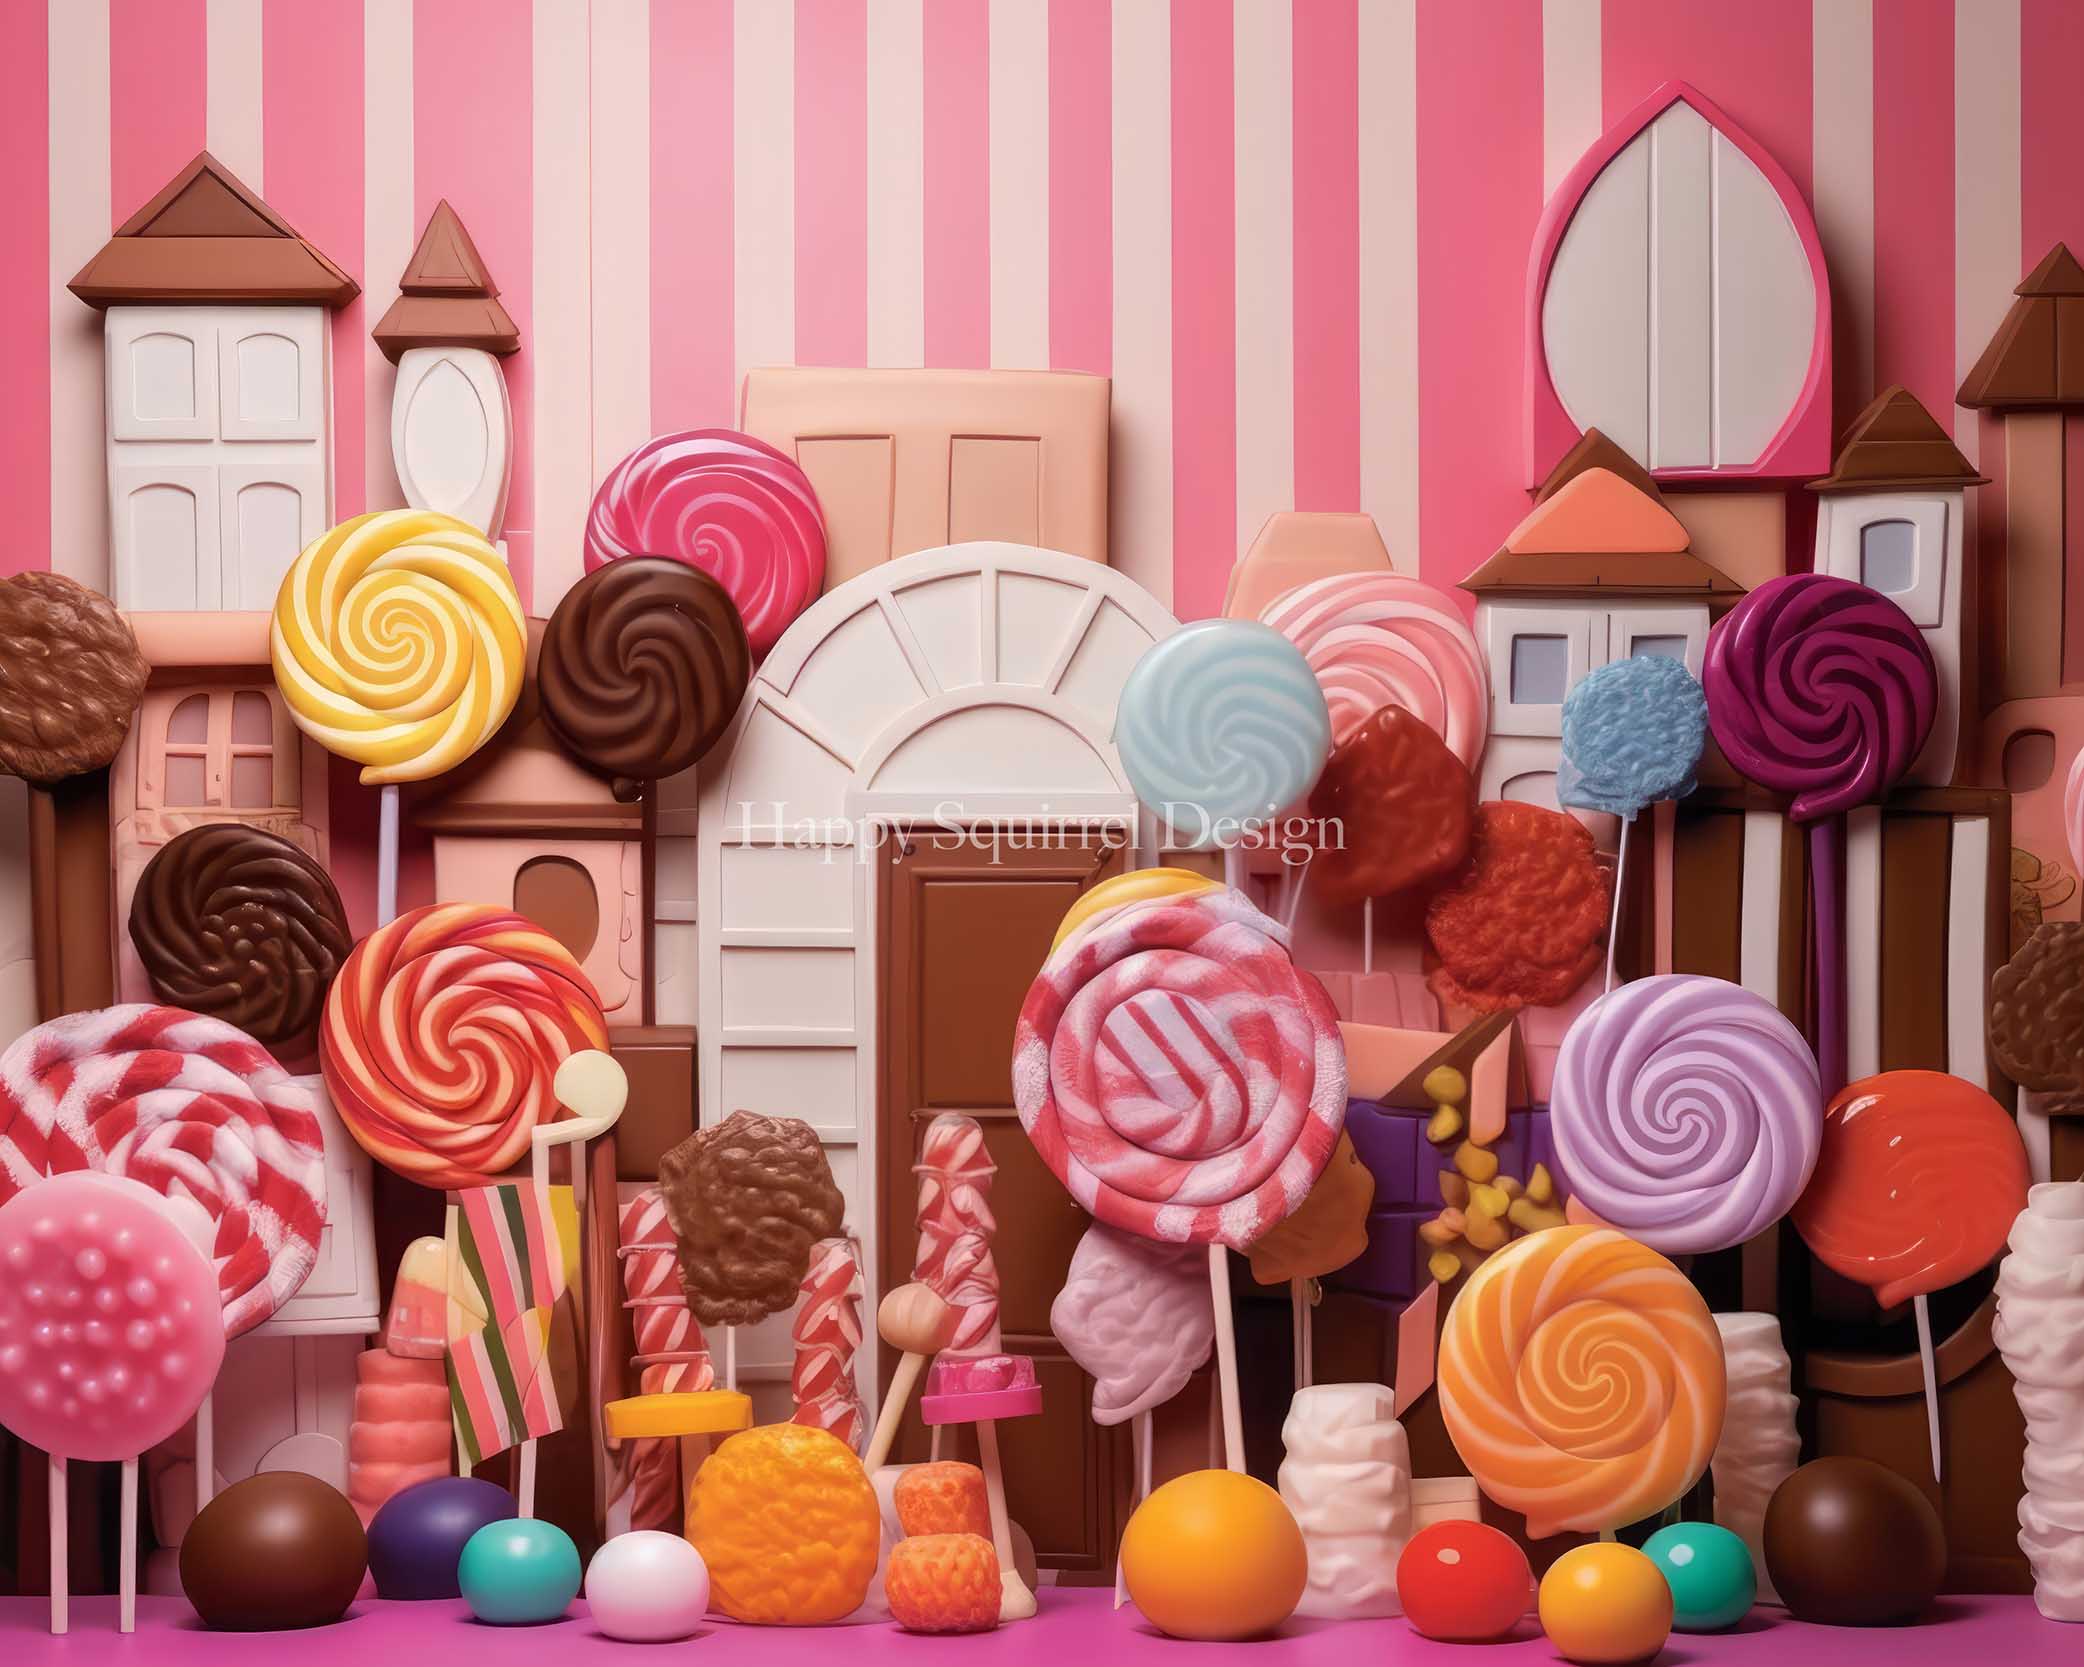 Kate Lollipop Wall Backdrop Designed by Happy Squirrel Design